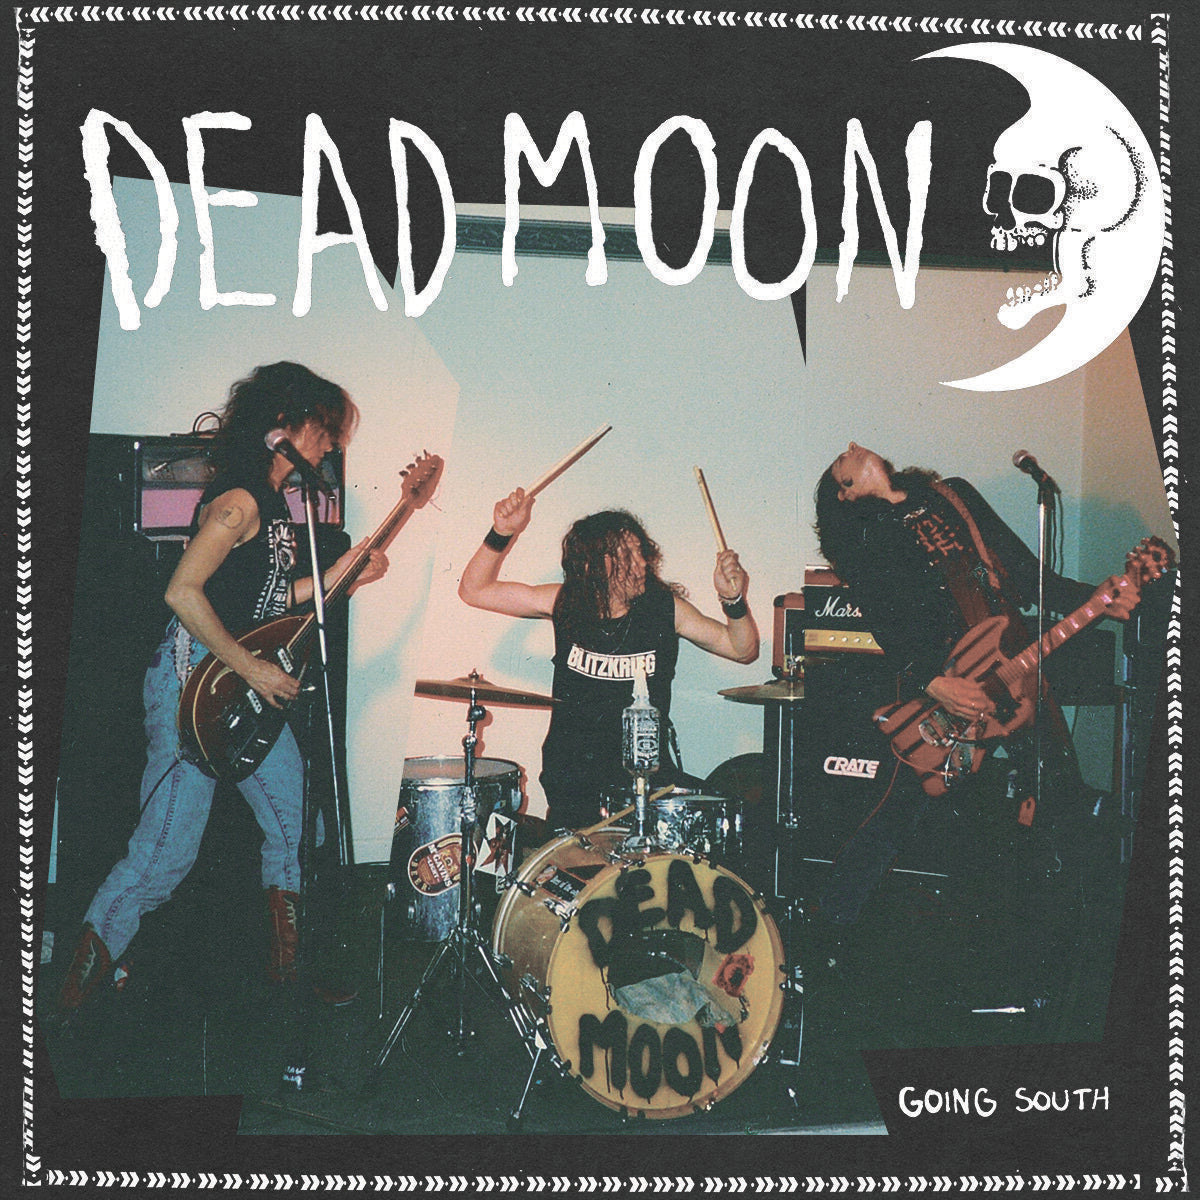 Dead Moon - Going South (Live in New Zealand 1992) [2xLP LIMITED EDITION] - New LP